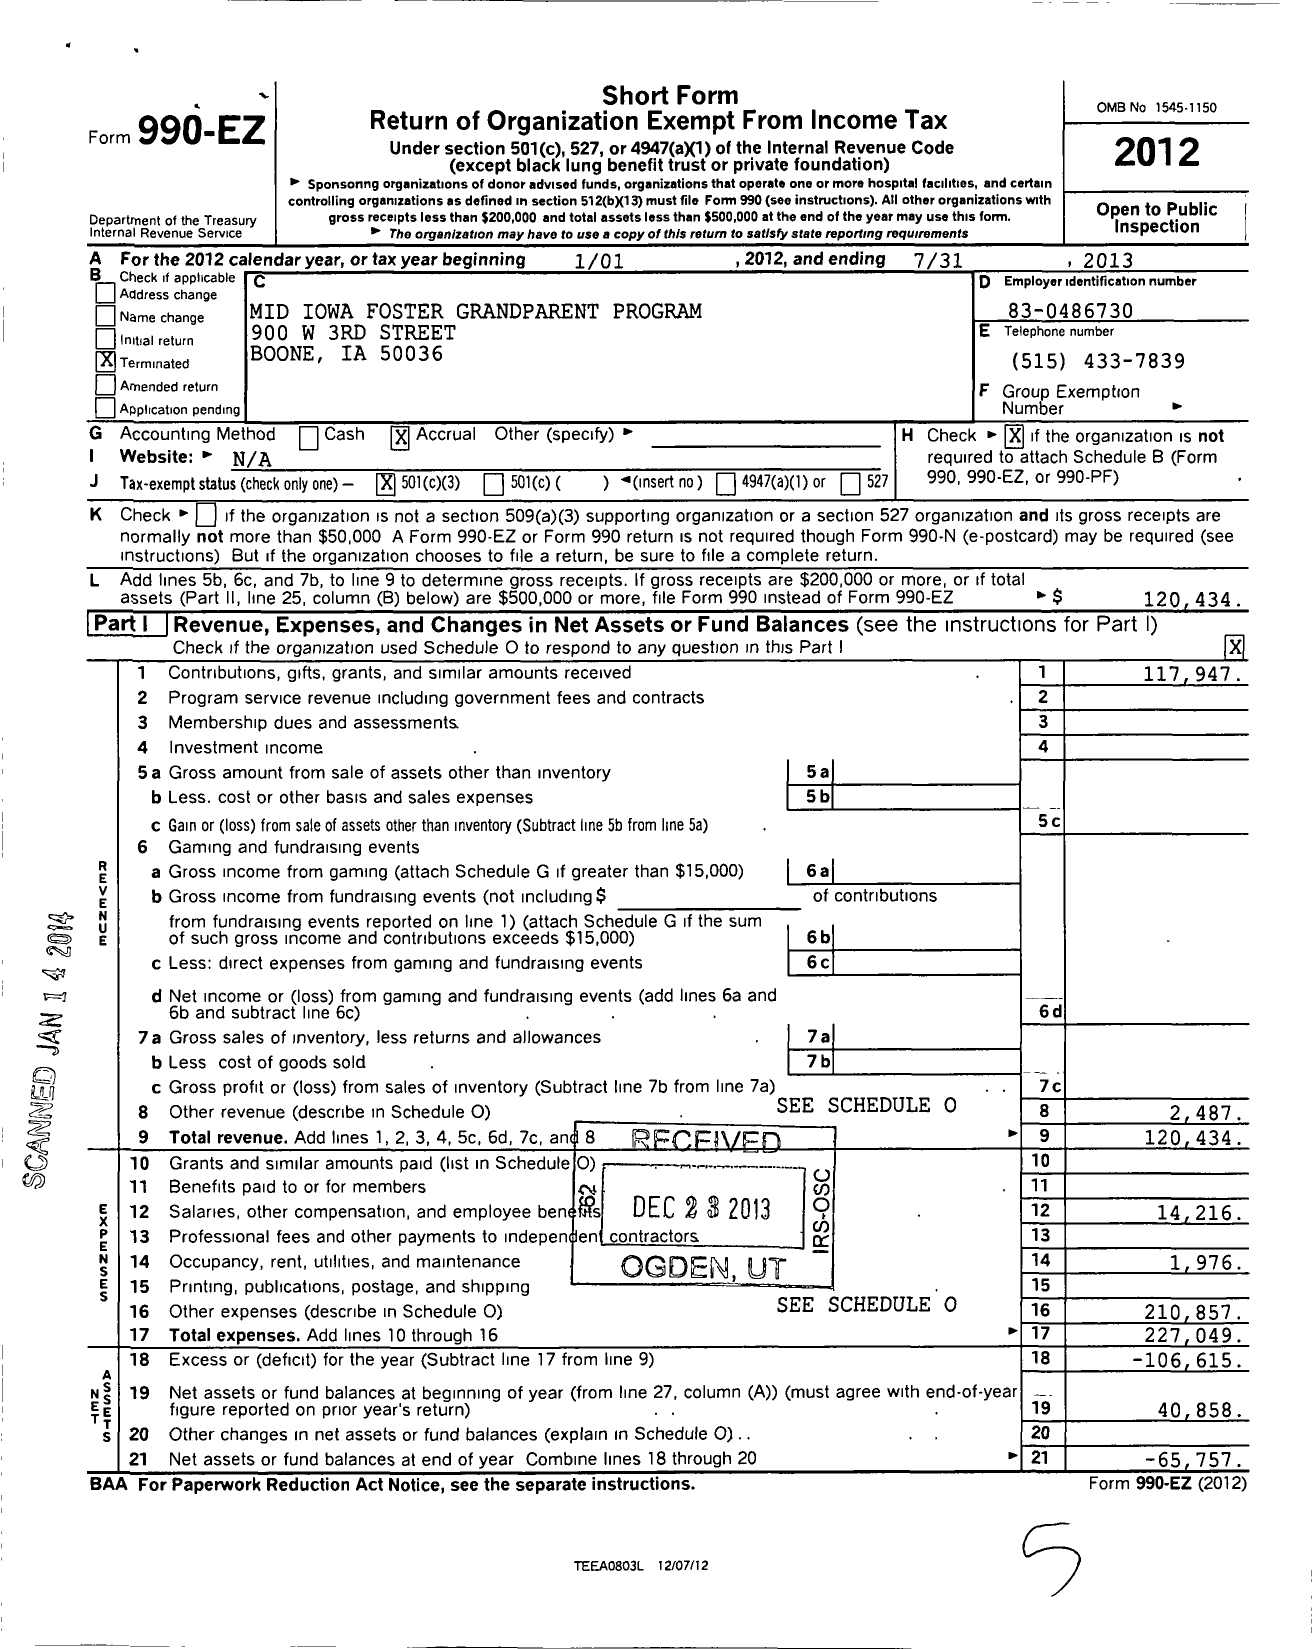 Image of first page of 2012 Form 990EZ for Mid Iowa Foster Grandparent Program